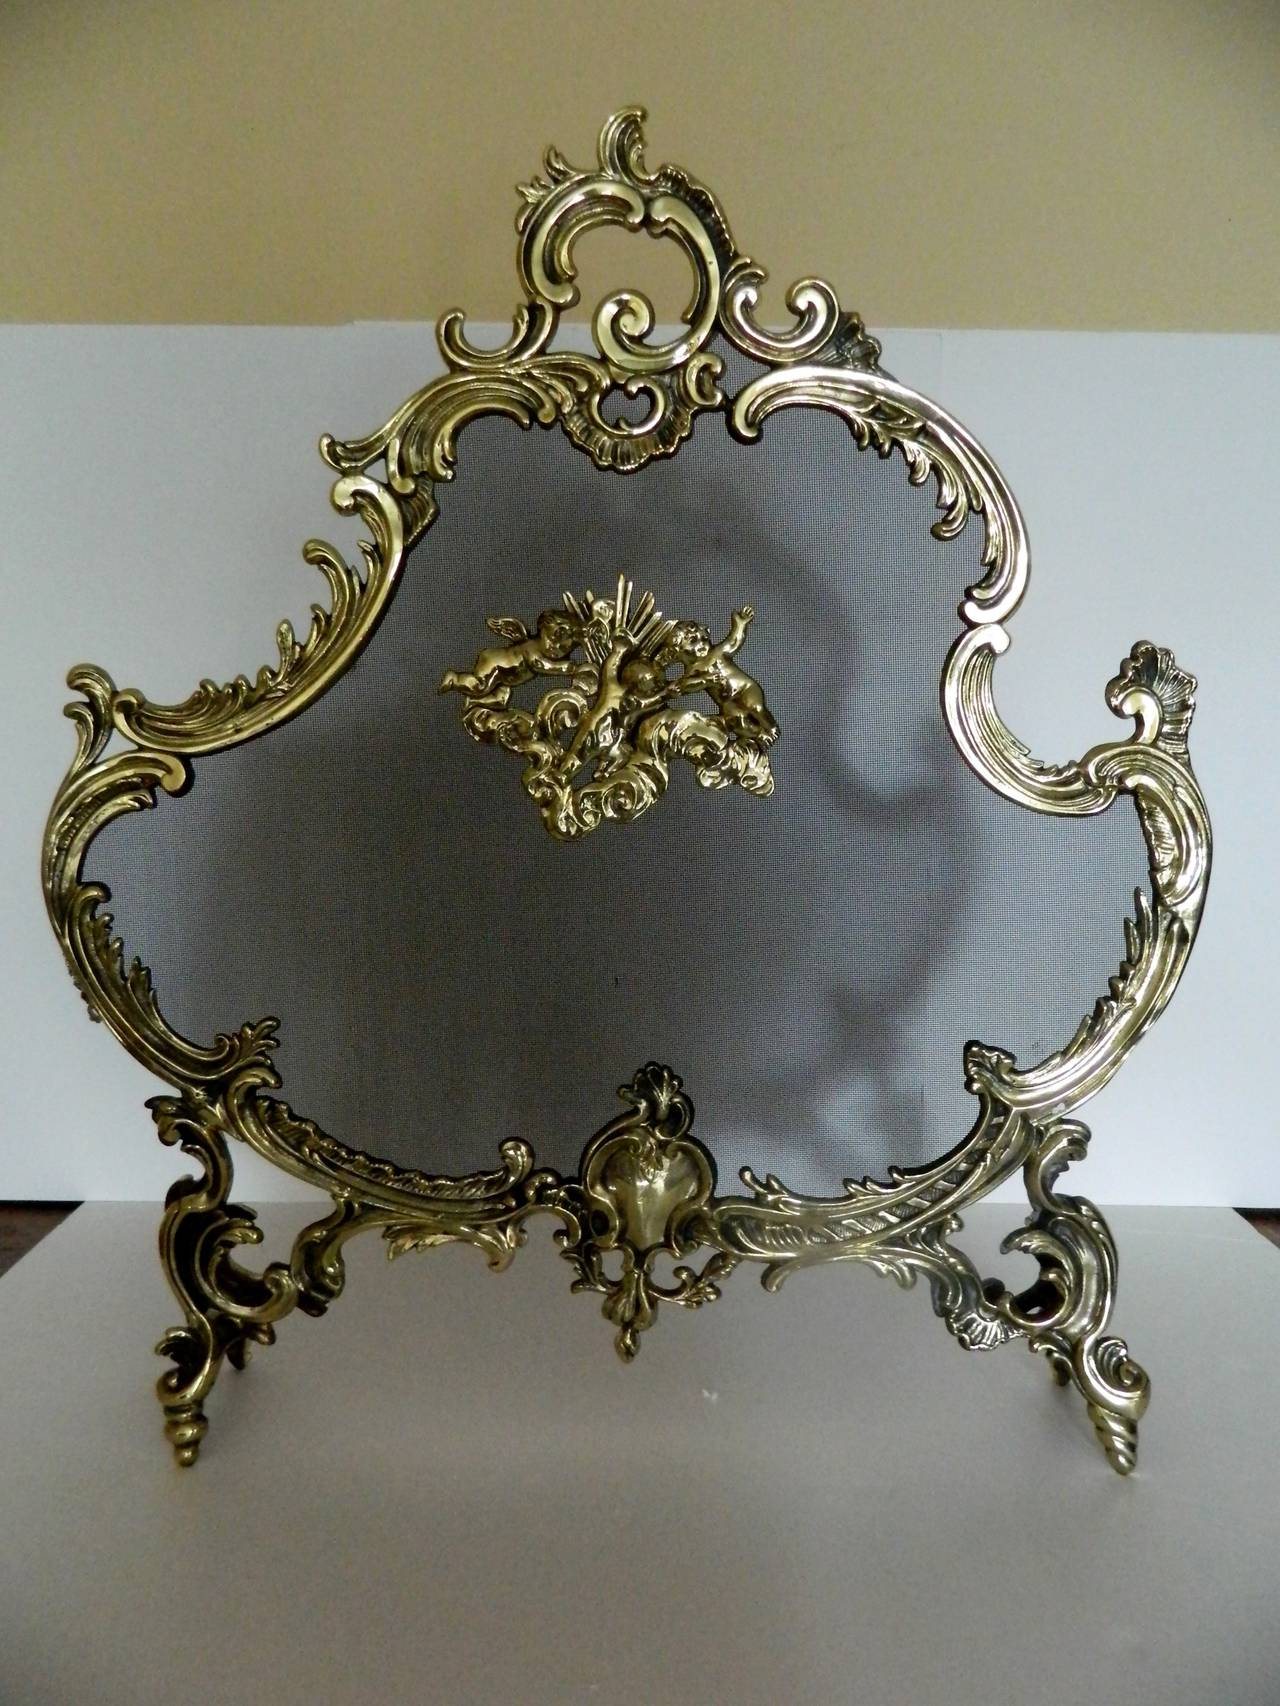 19th Century French Polished Brass Fire Screen Adorned with Cherubs in the Center.  Professionally cleaned and polished